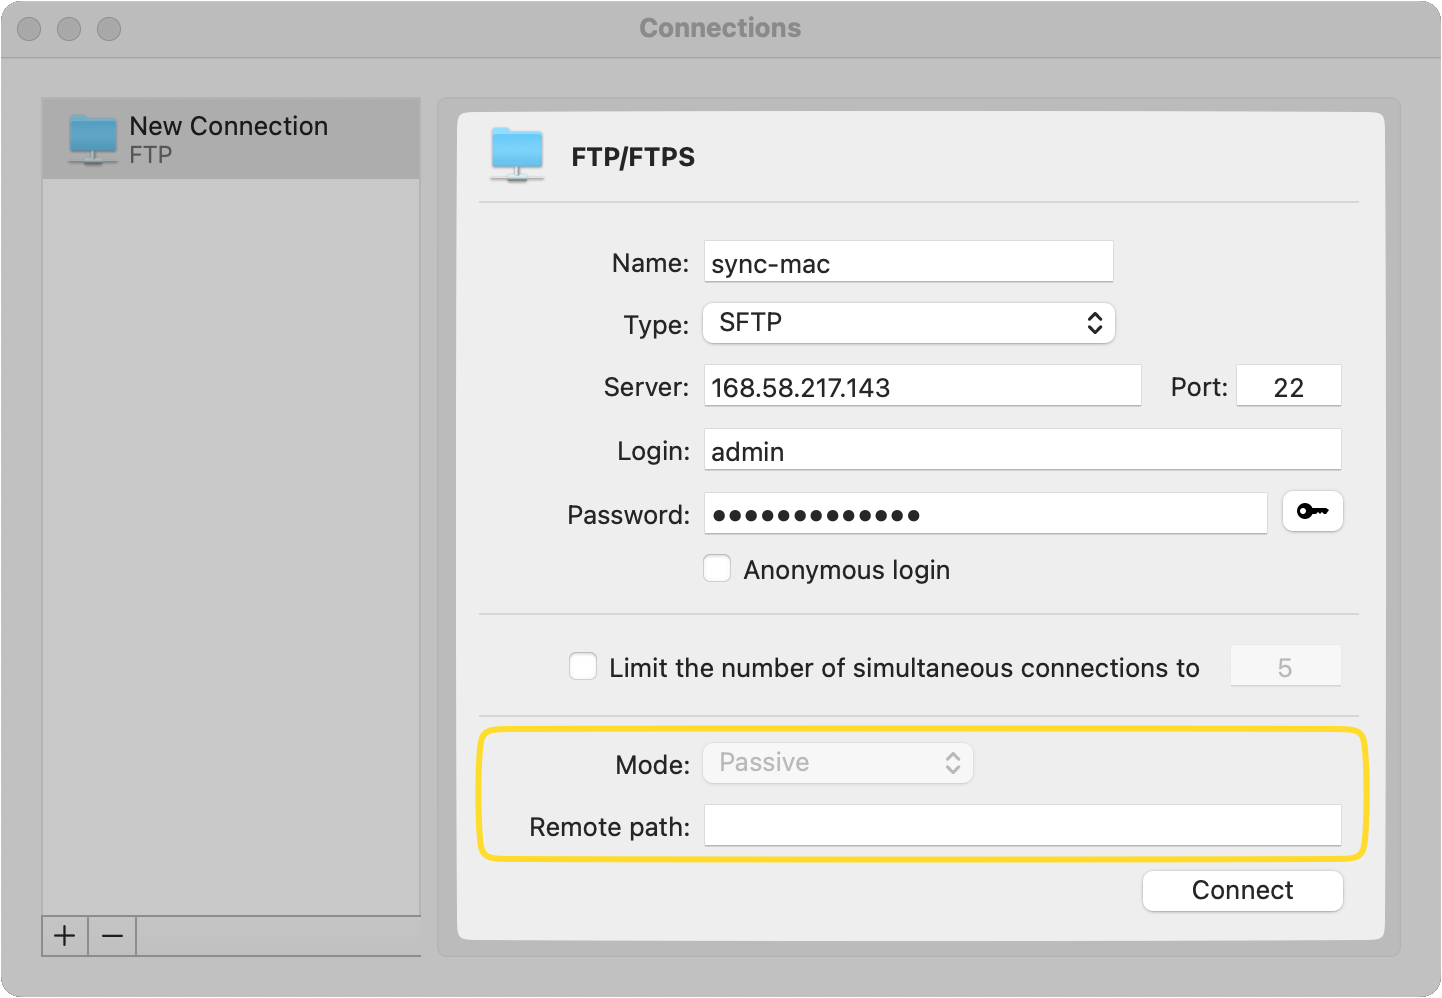 The FTP/FTPS connection is opened; the Mode and Remote path fields are highlighted